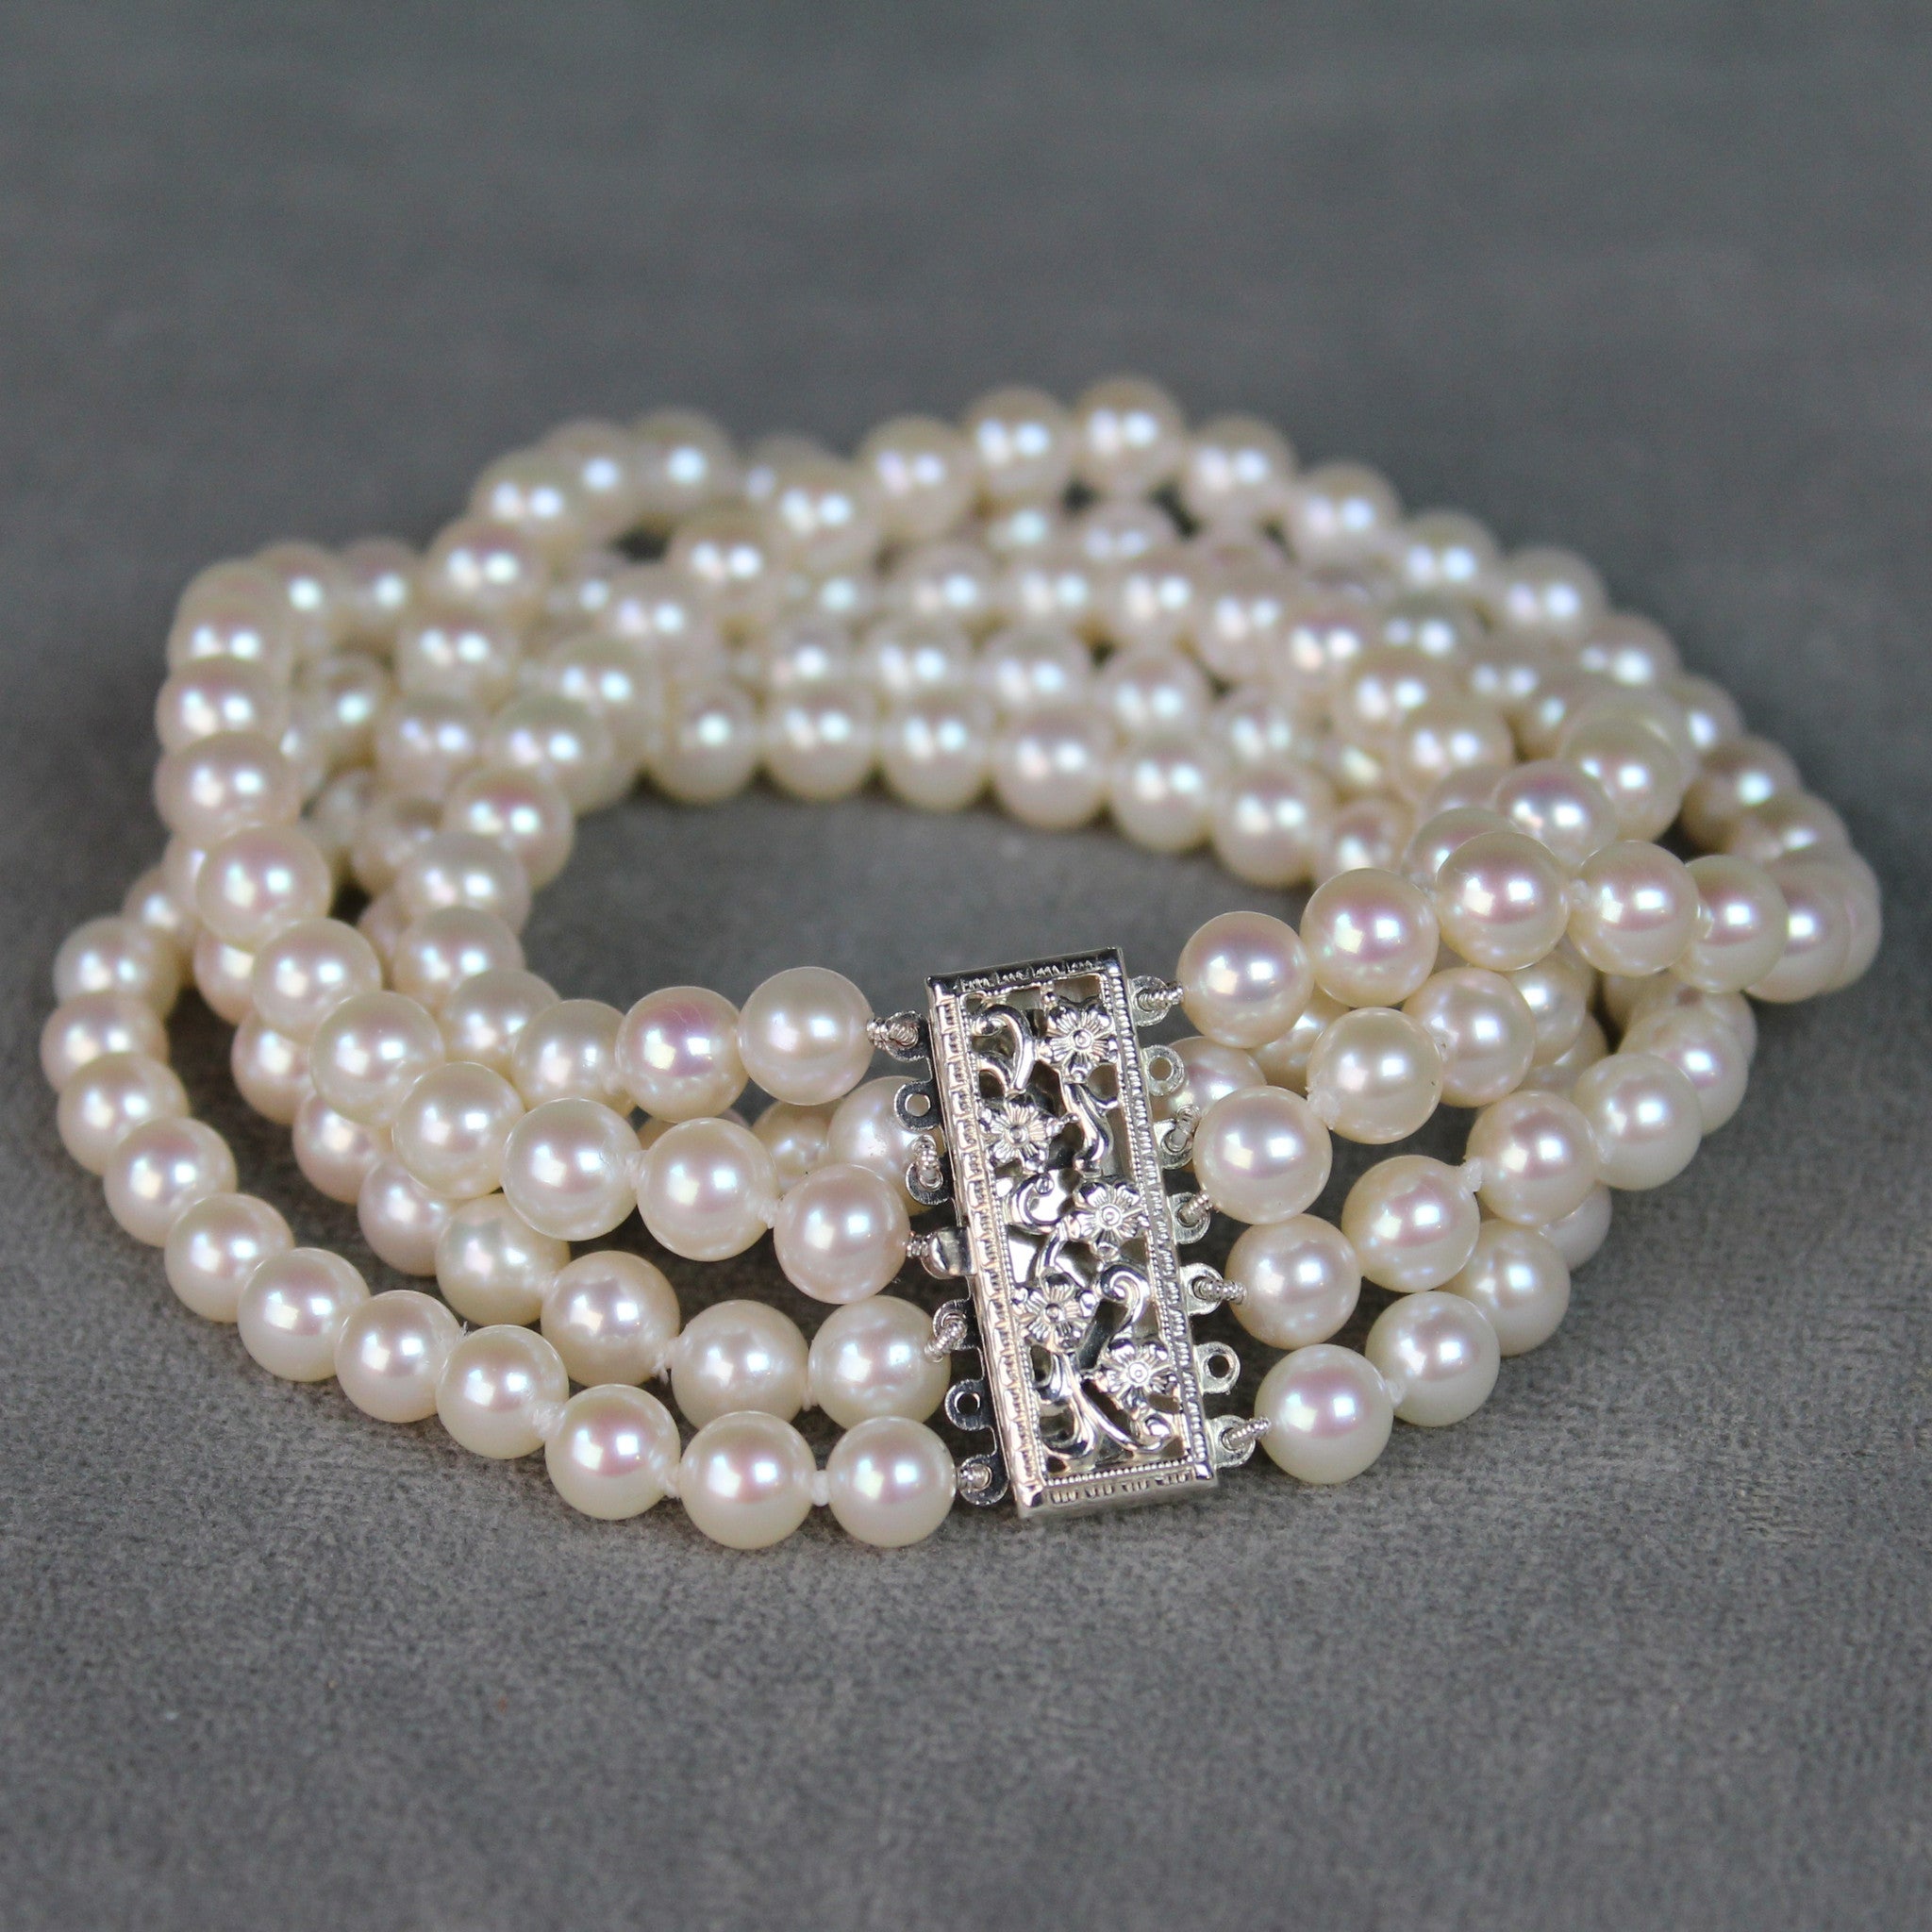 Real Pearl 5 Multi-Strand Bracelet | AAA 5.5-6 mm Cultured Freshwater Pearls with choice of clasp Jewelry,Bracelet Bourdage Pearl Jewelry    sherri bourdage